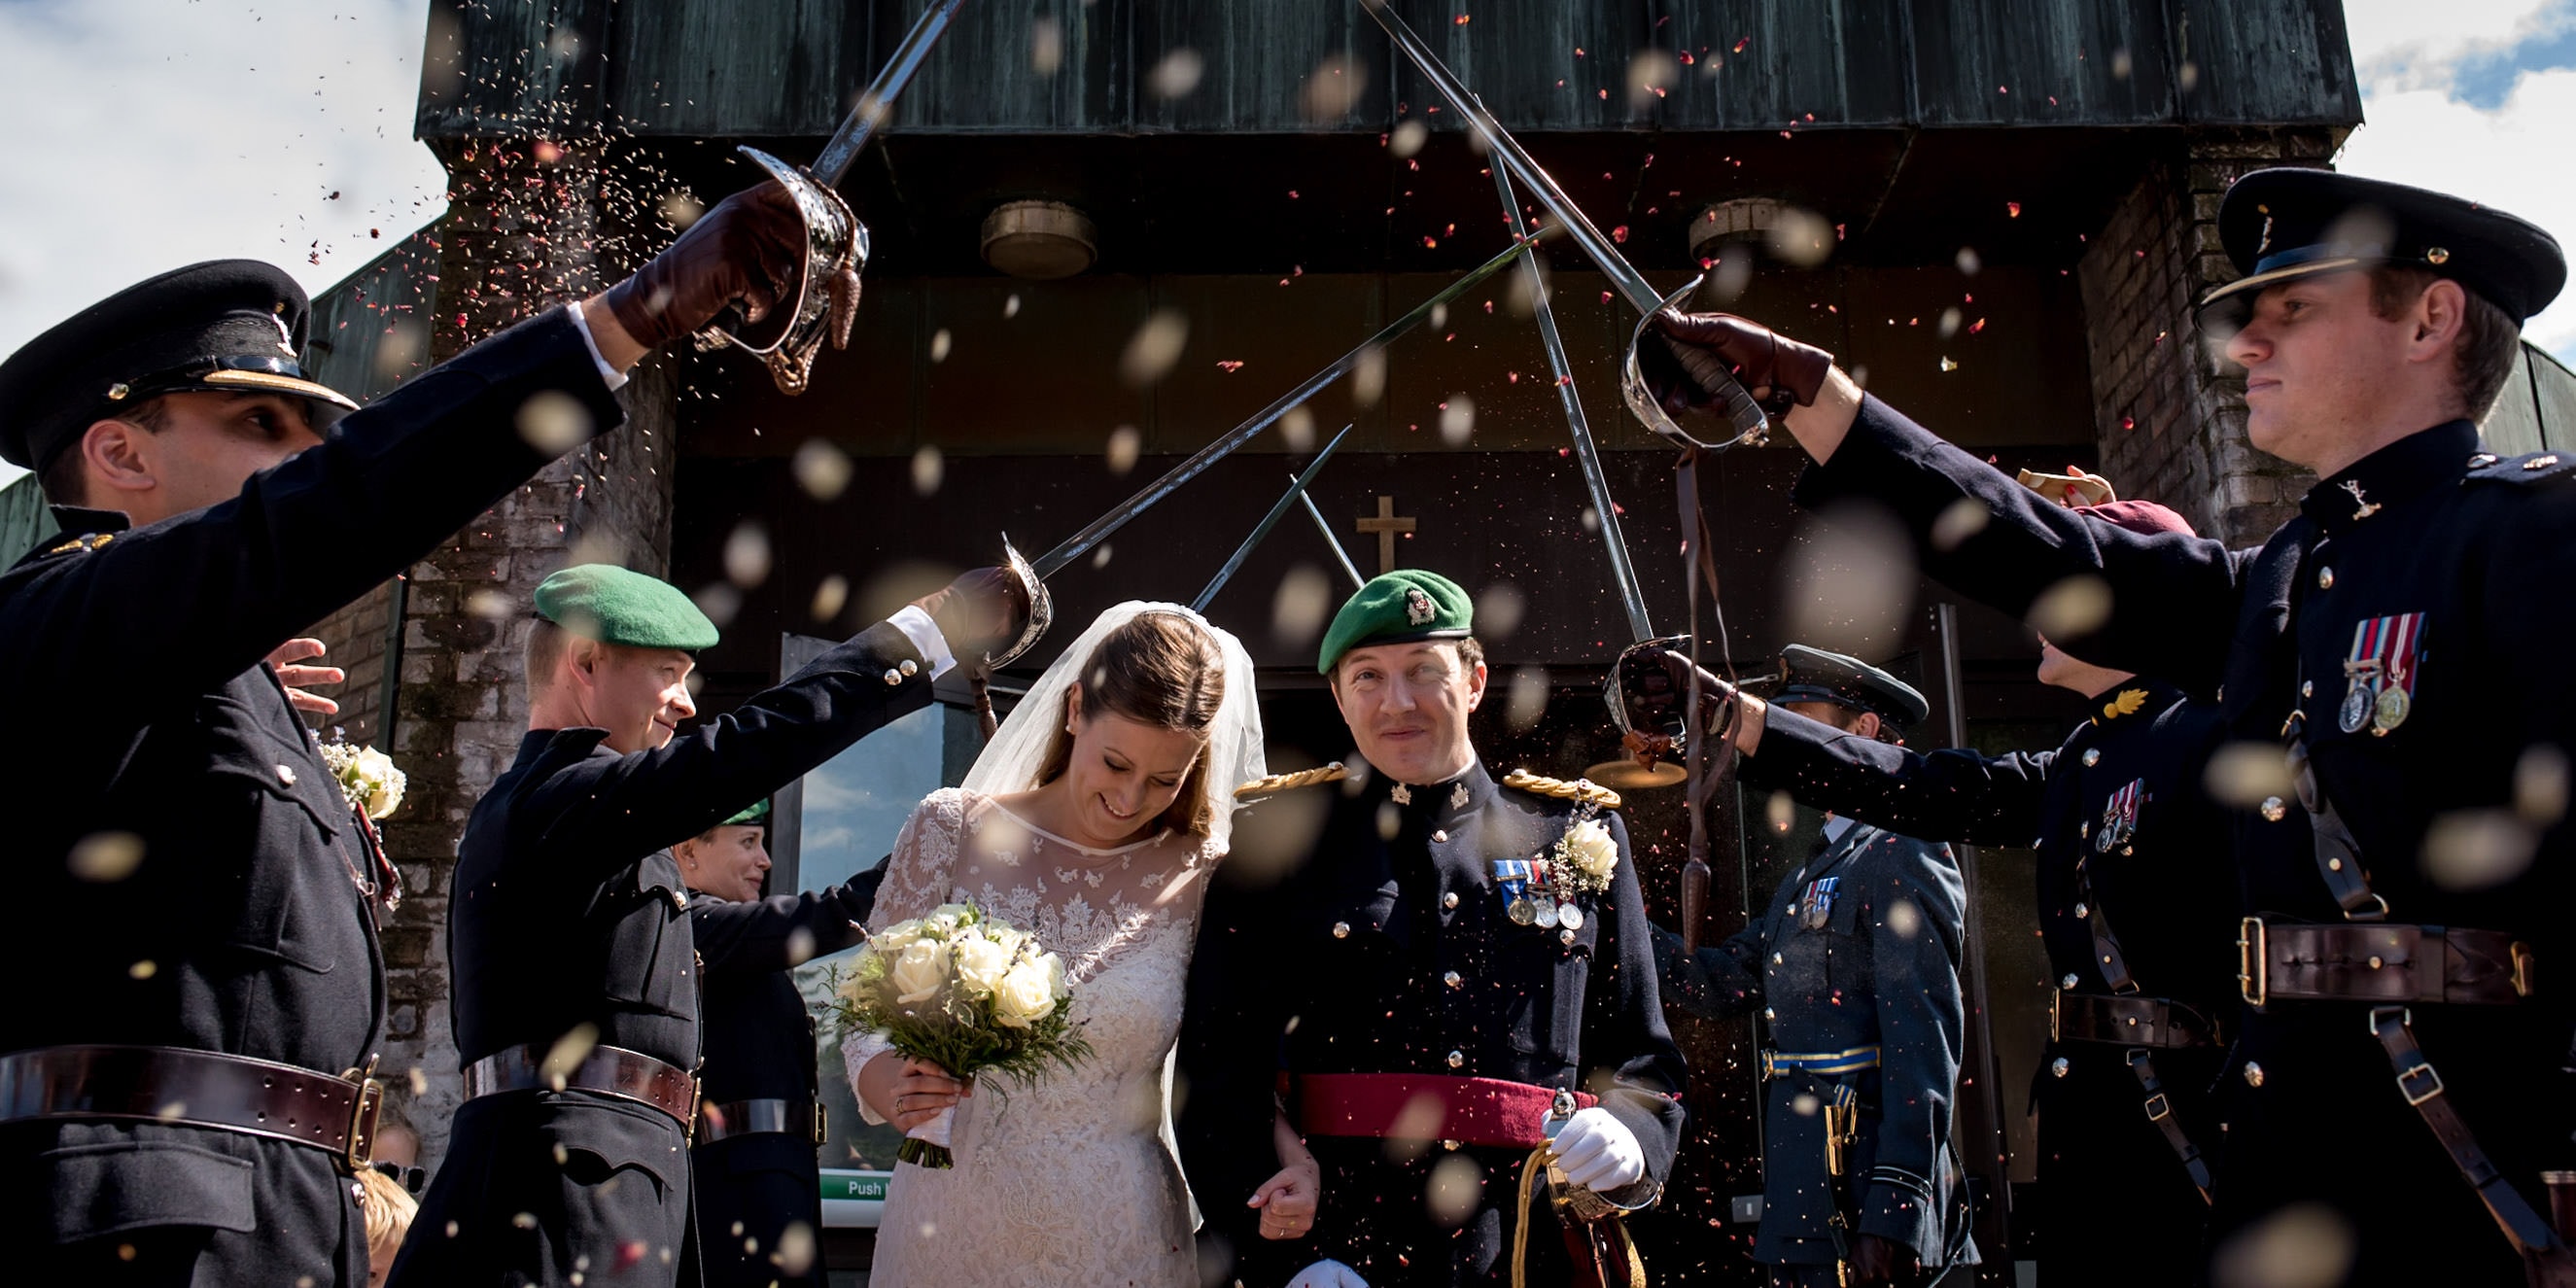 honour guard and confetti at this fun military wedding